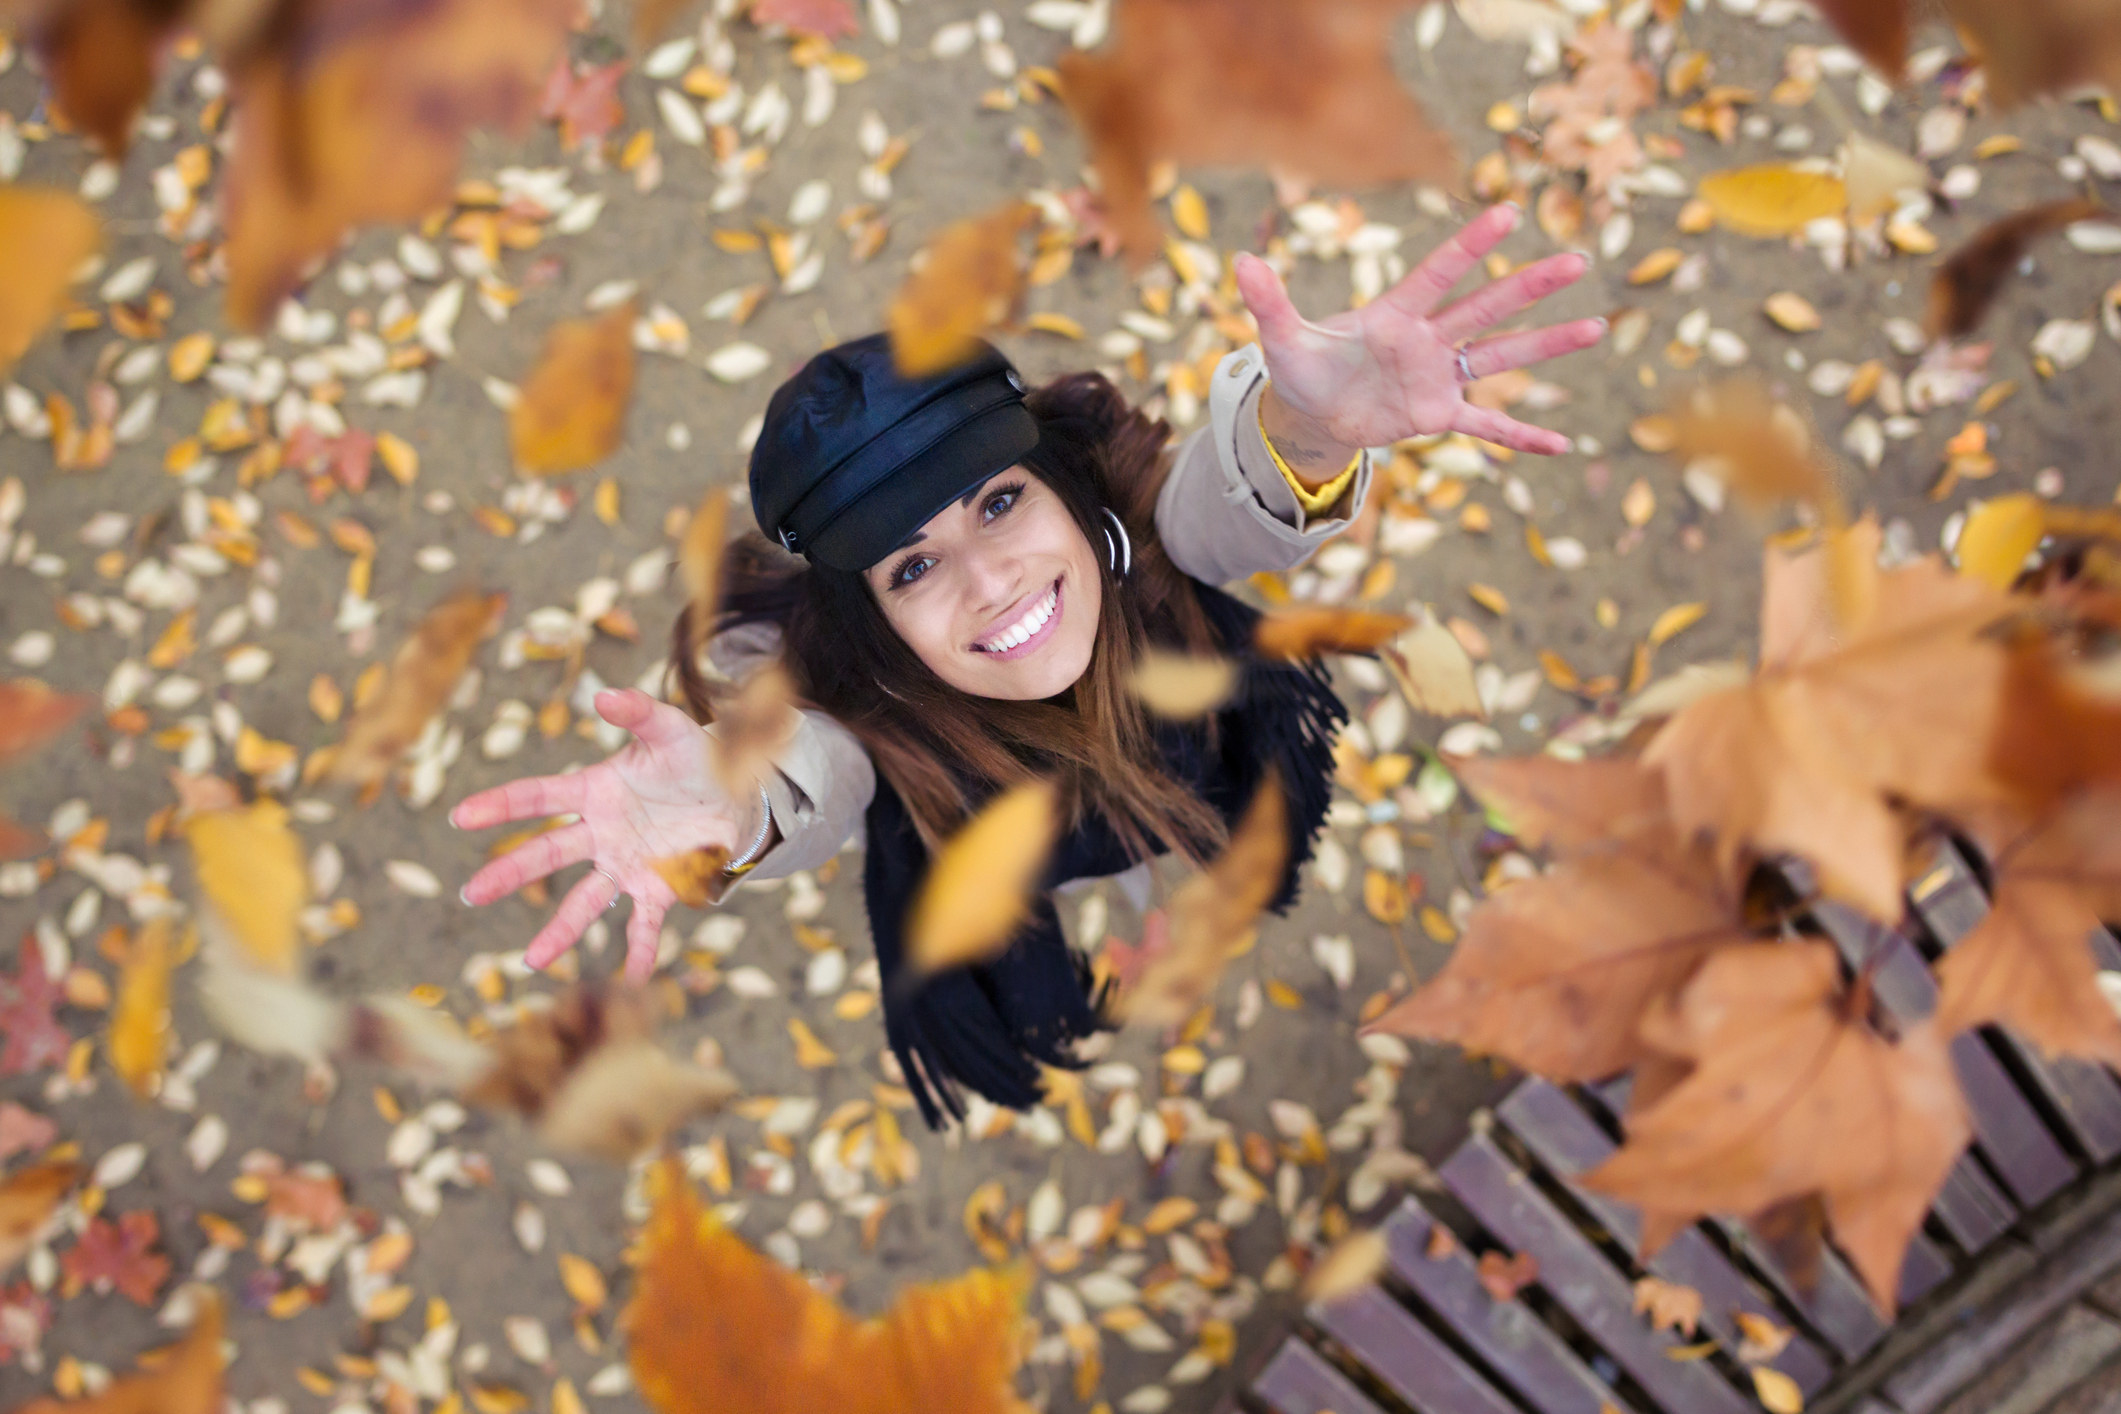 A woman throwing fall leaves into the air